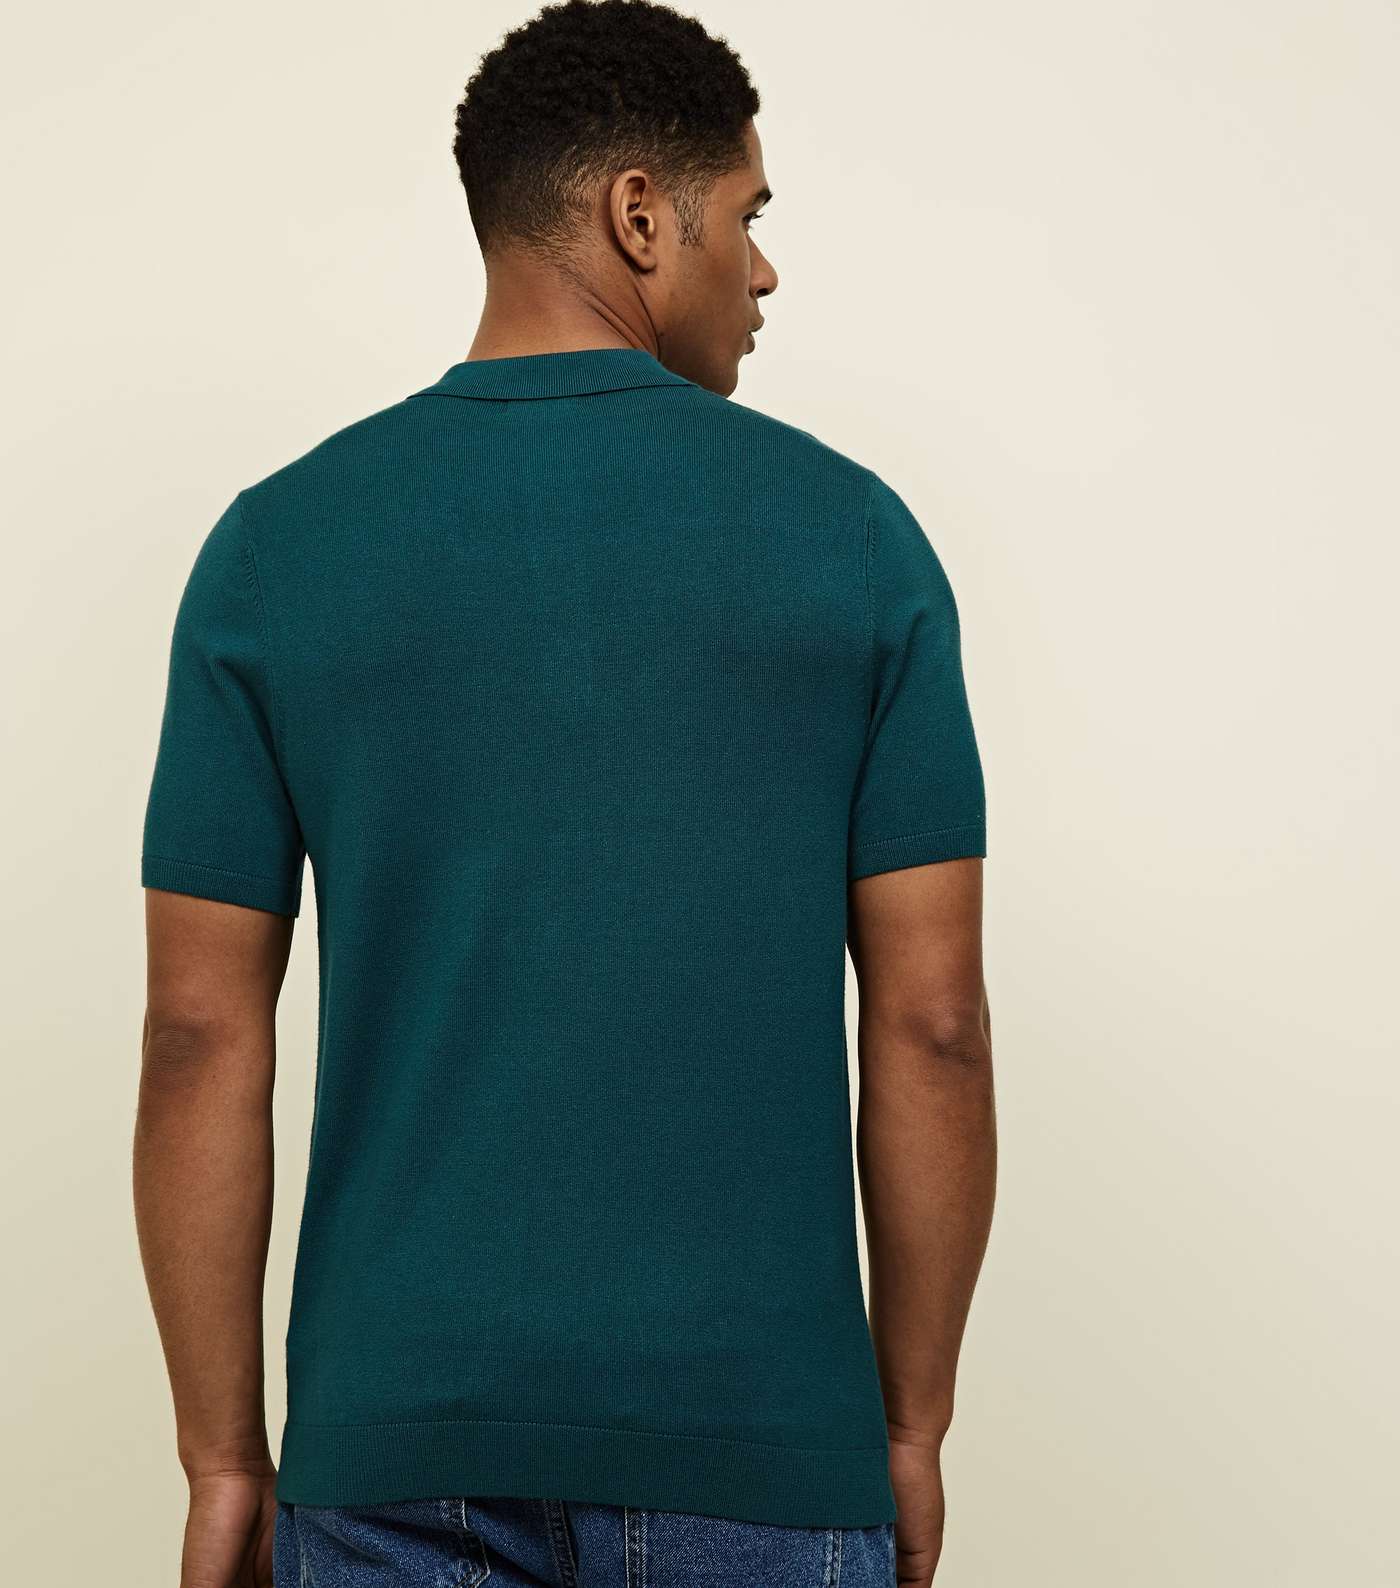 Teal Knit Muscle Fit Polo Shirt Image 3